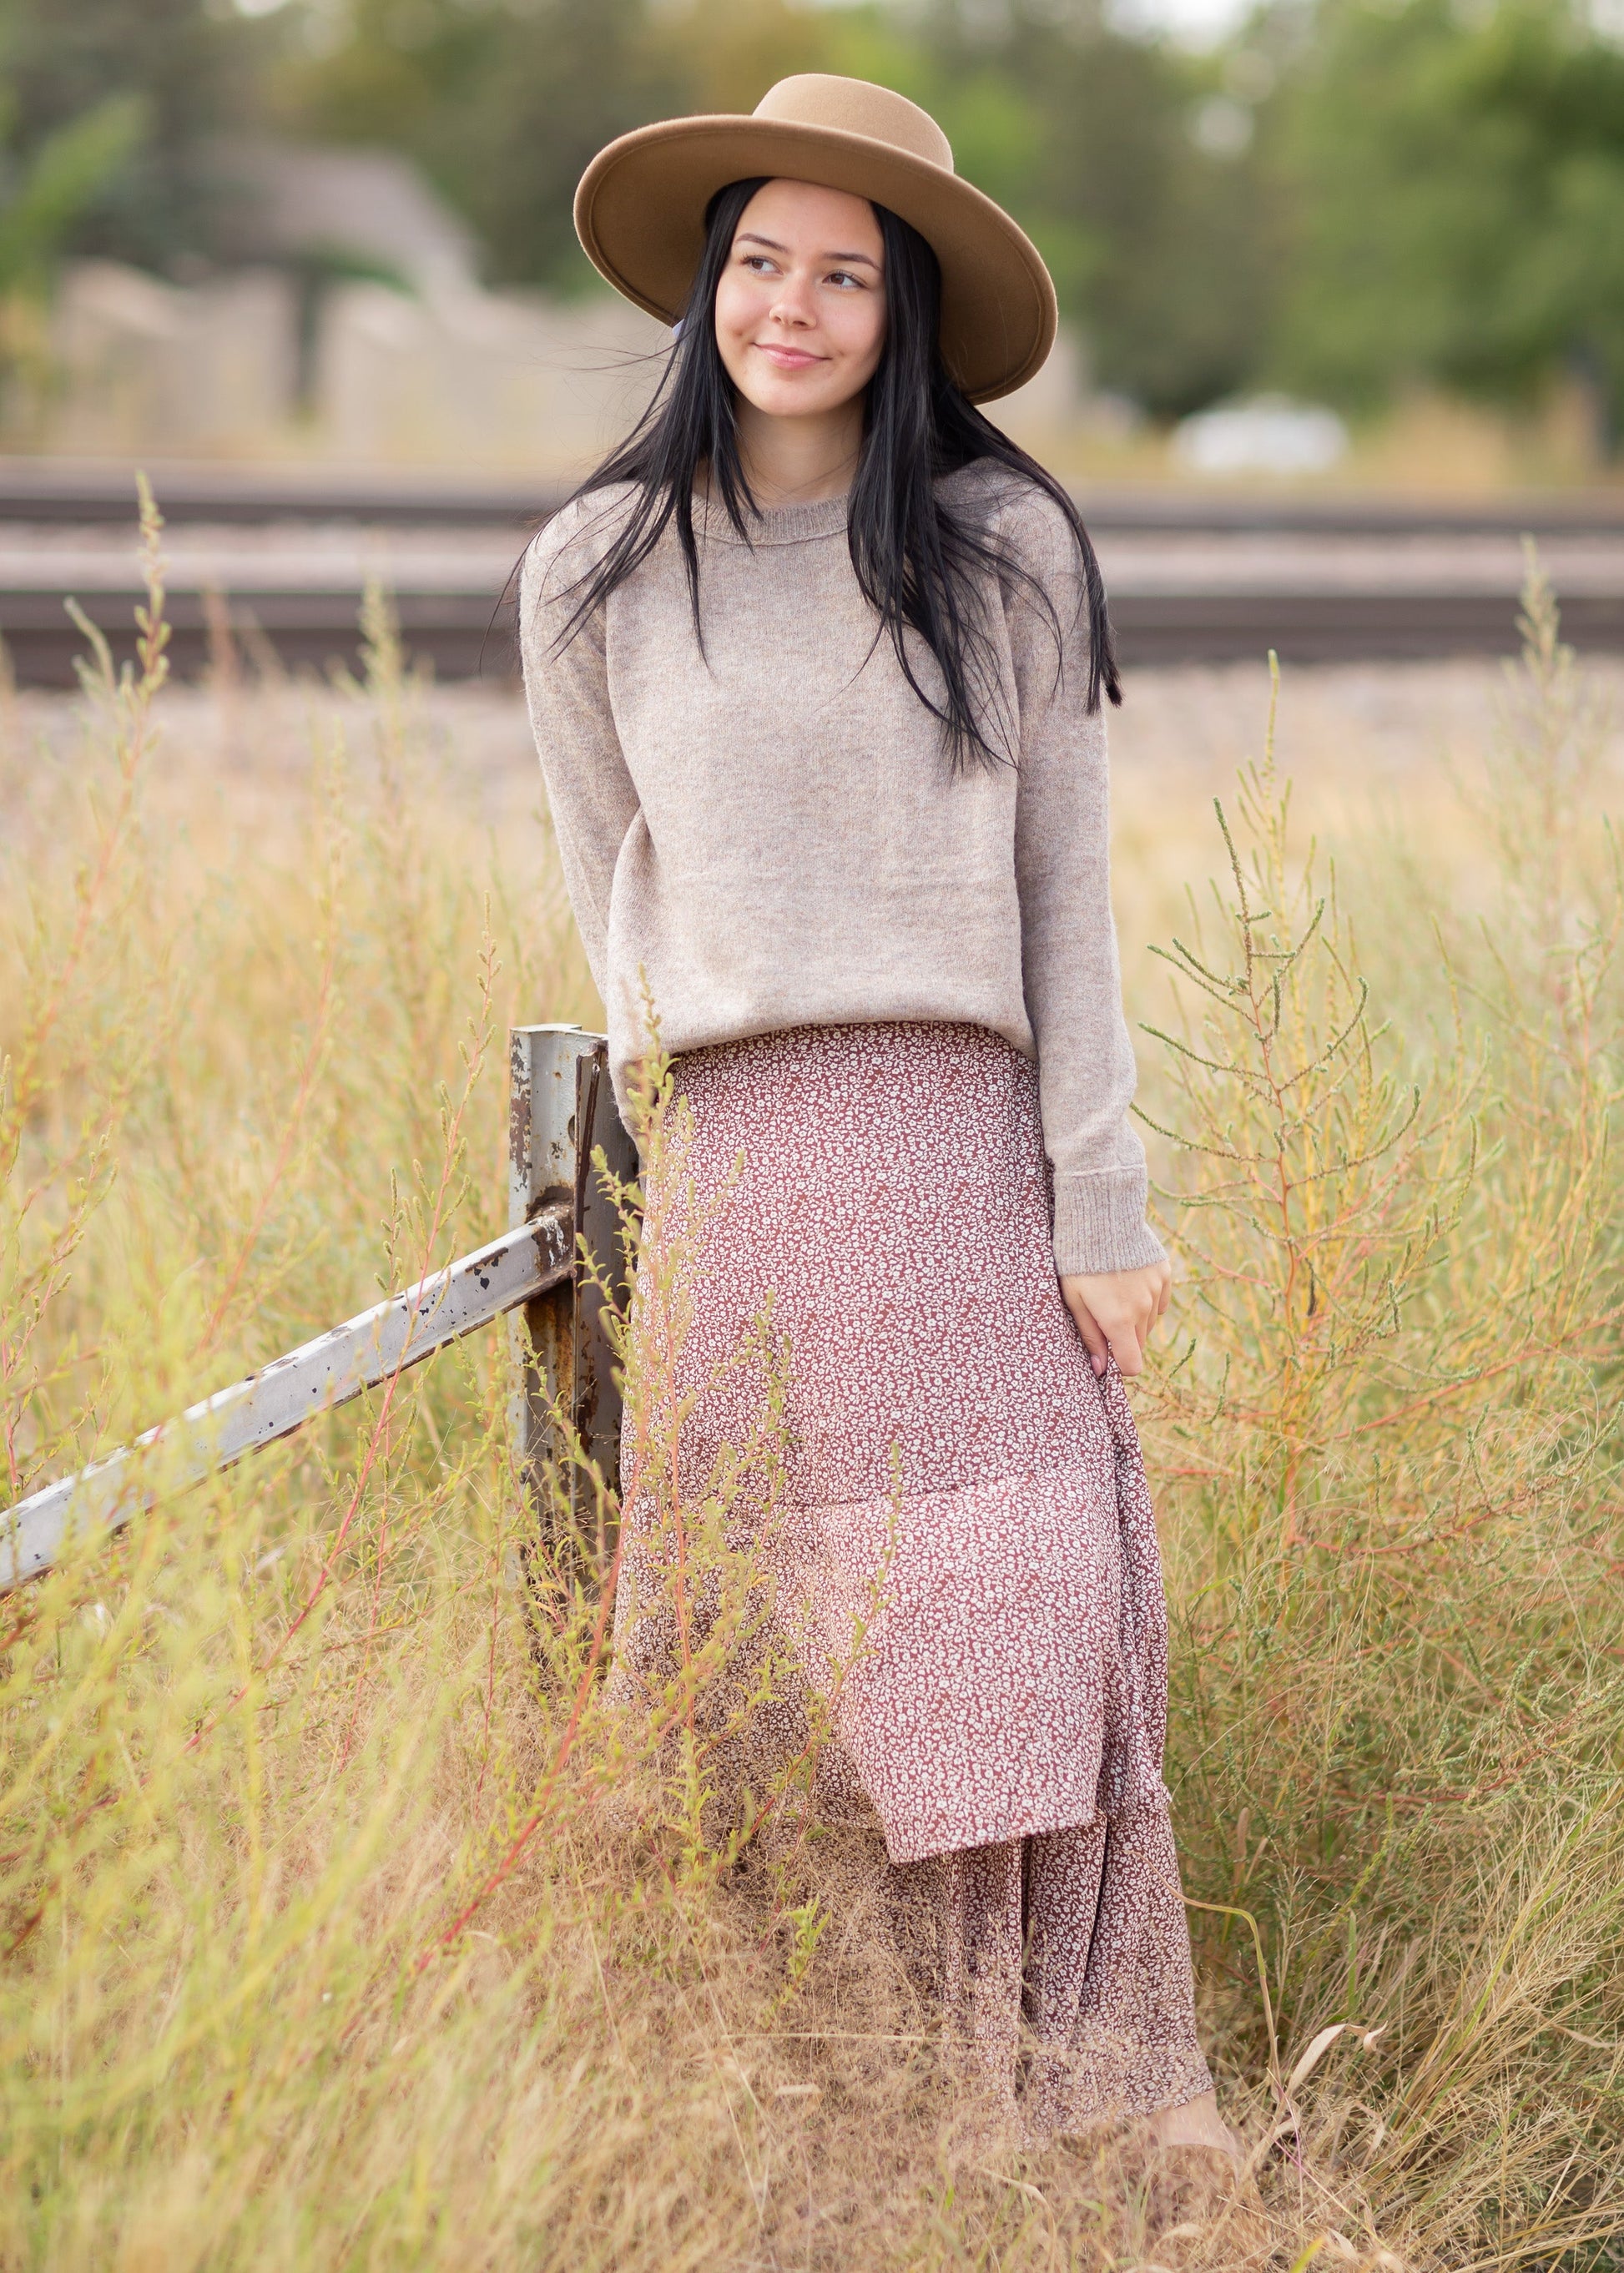 Long Sleeve Taupe Sweater Tops